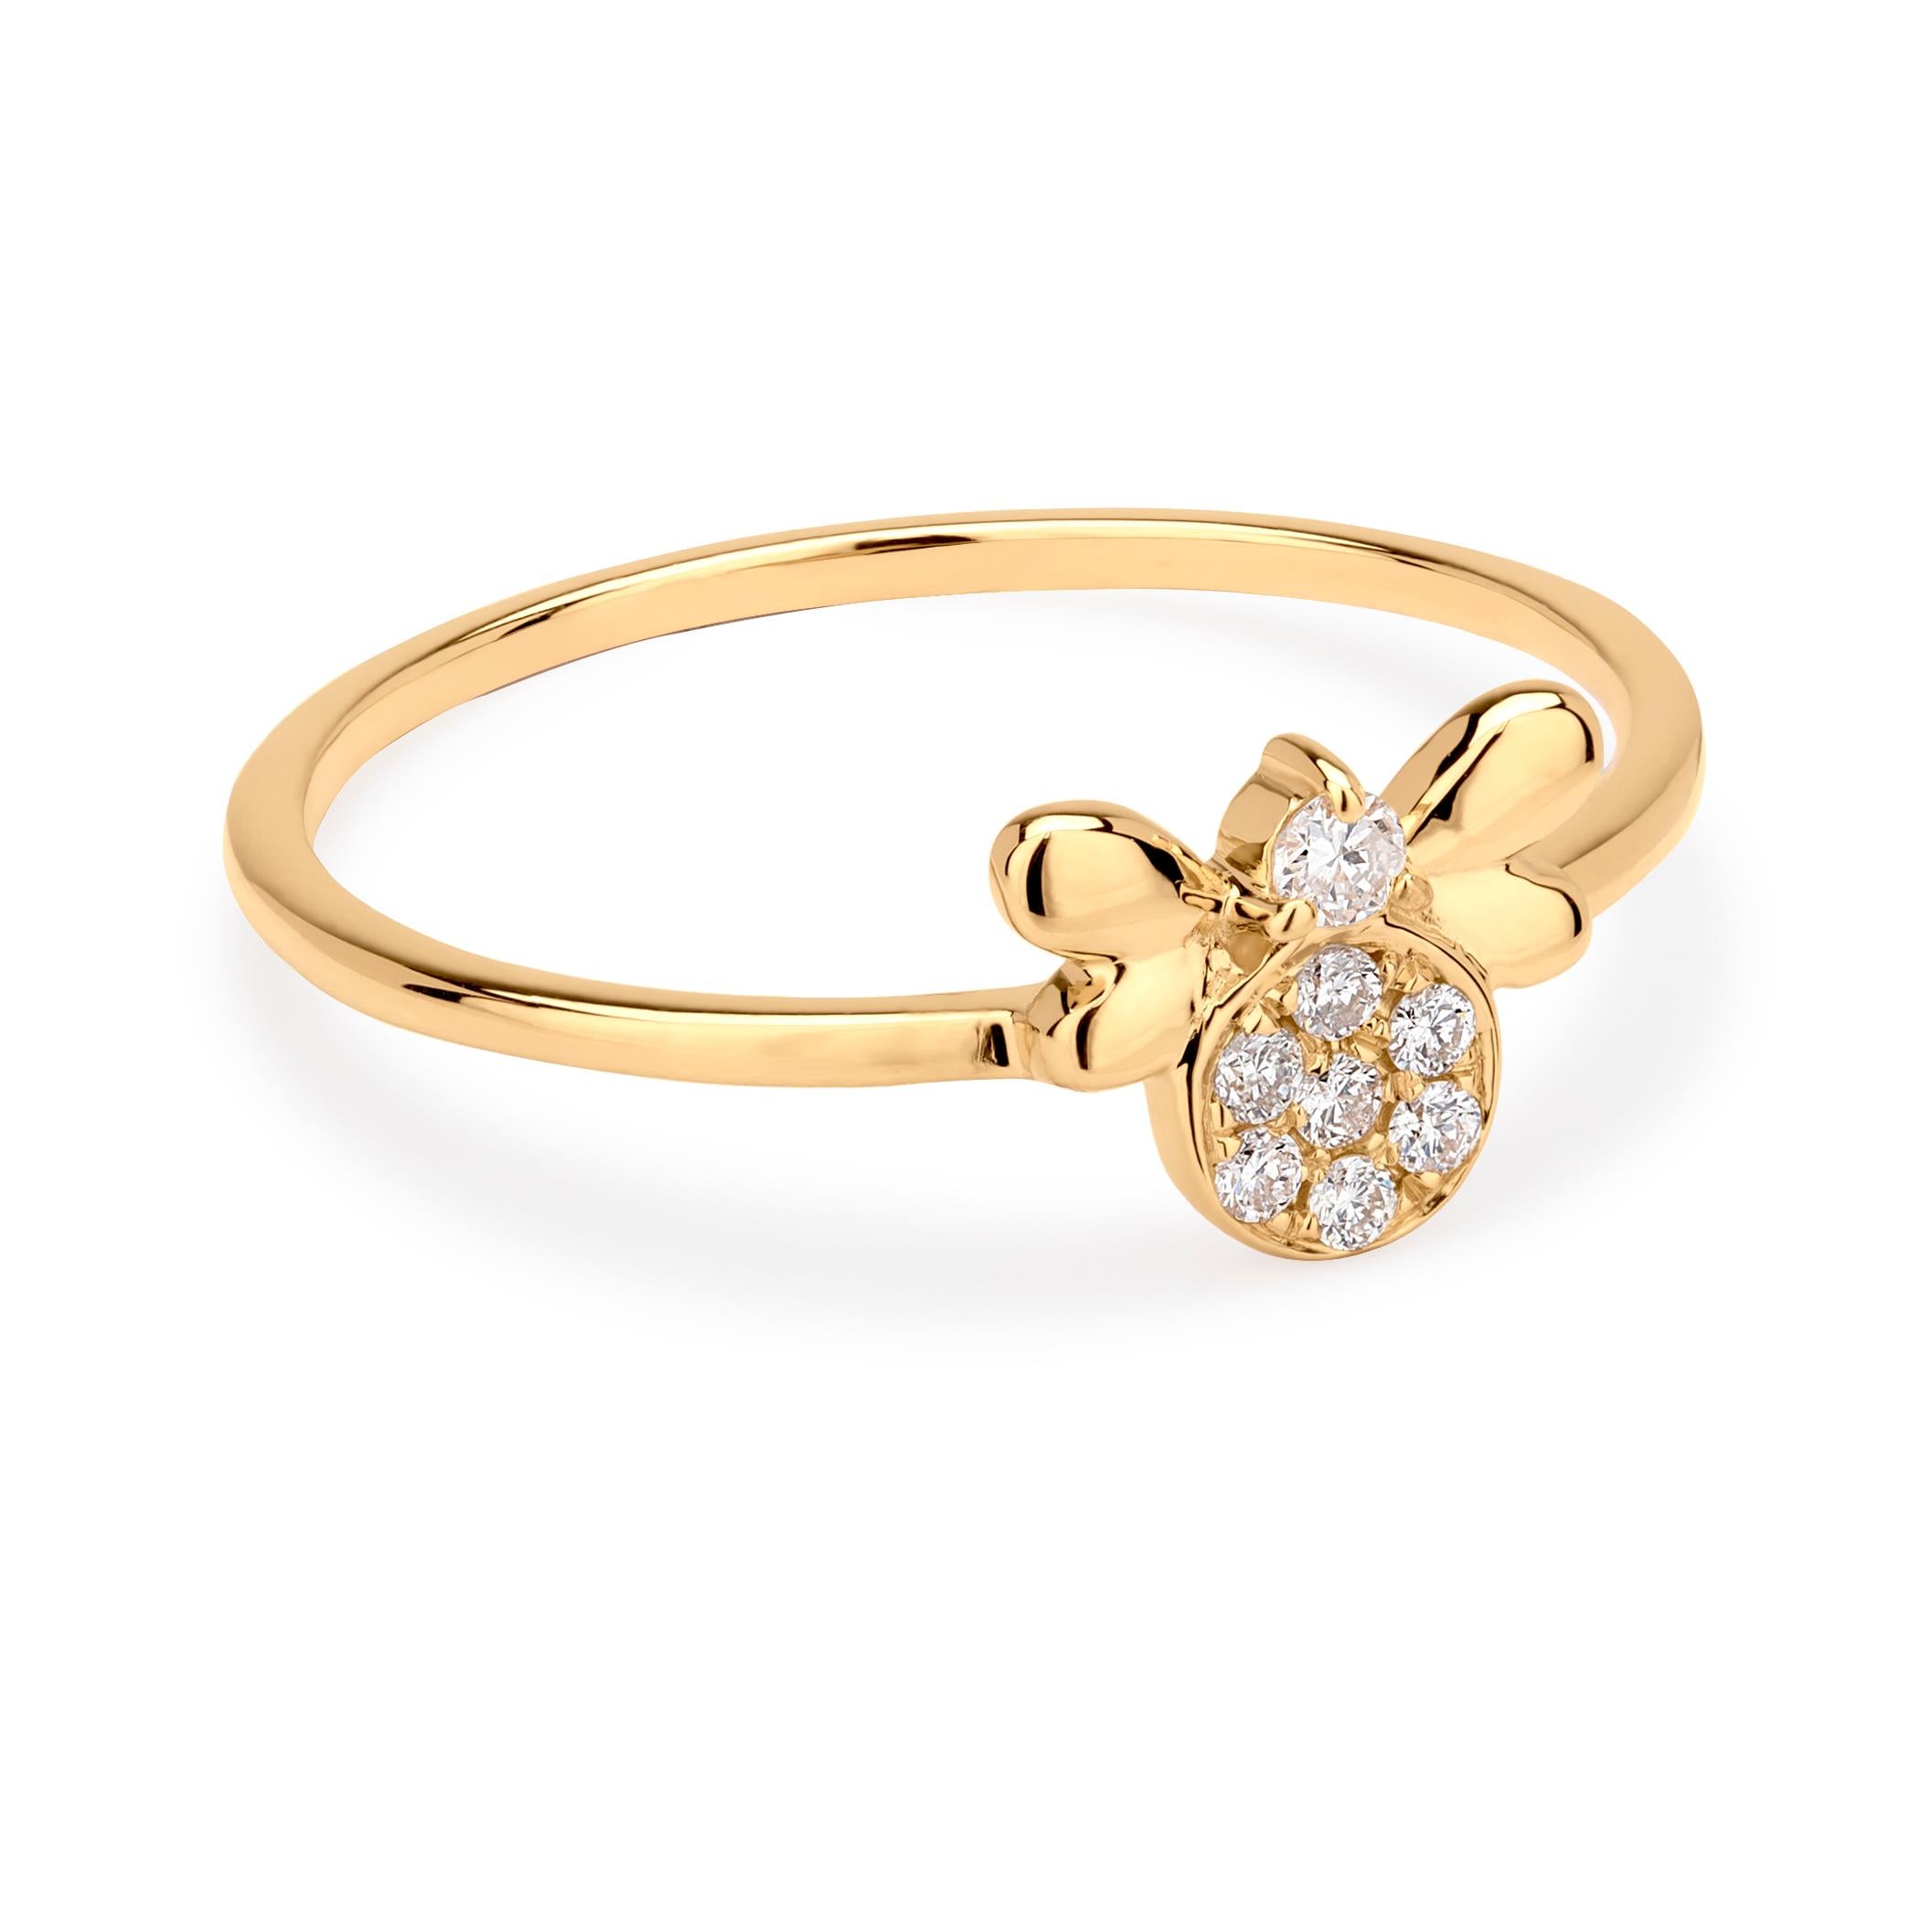 Grace your finger with a Luxle bee ring it symbolizes a strong network of unconditional love and support. Subtle yet pretty this bee ring is the new fashion statement. It is featured with 8 round diamonds, totaling 0.09Cts, pave set in a square